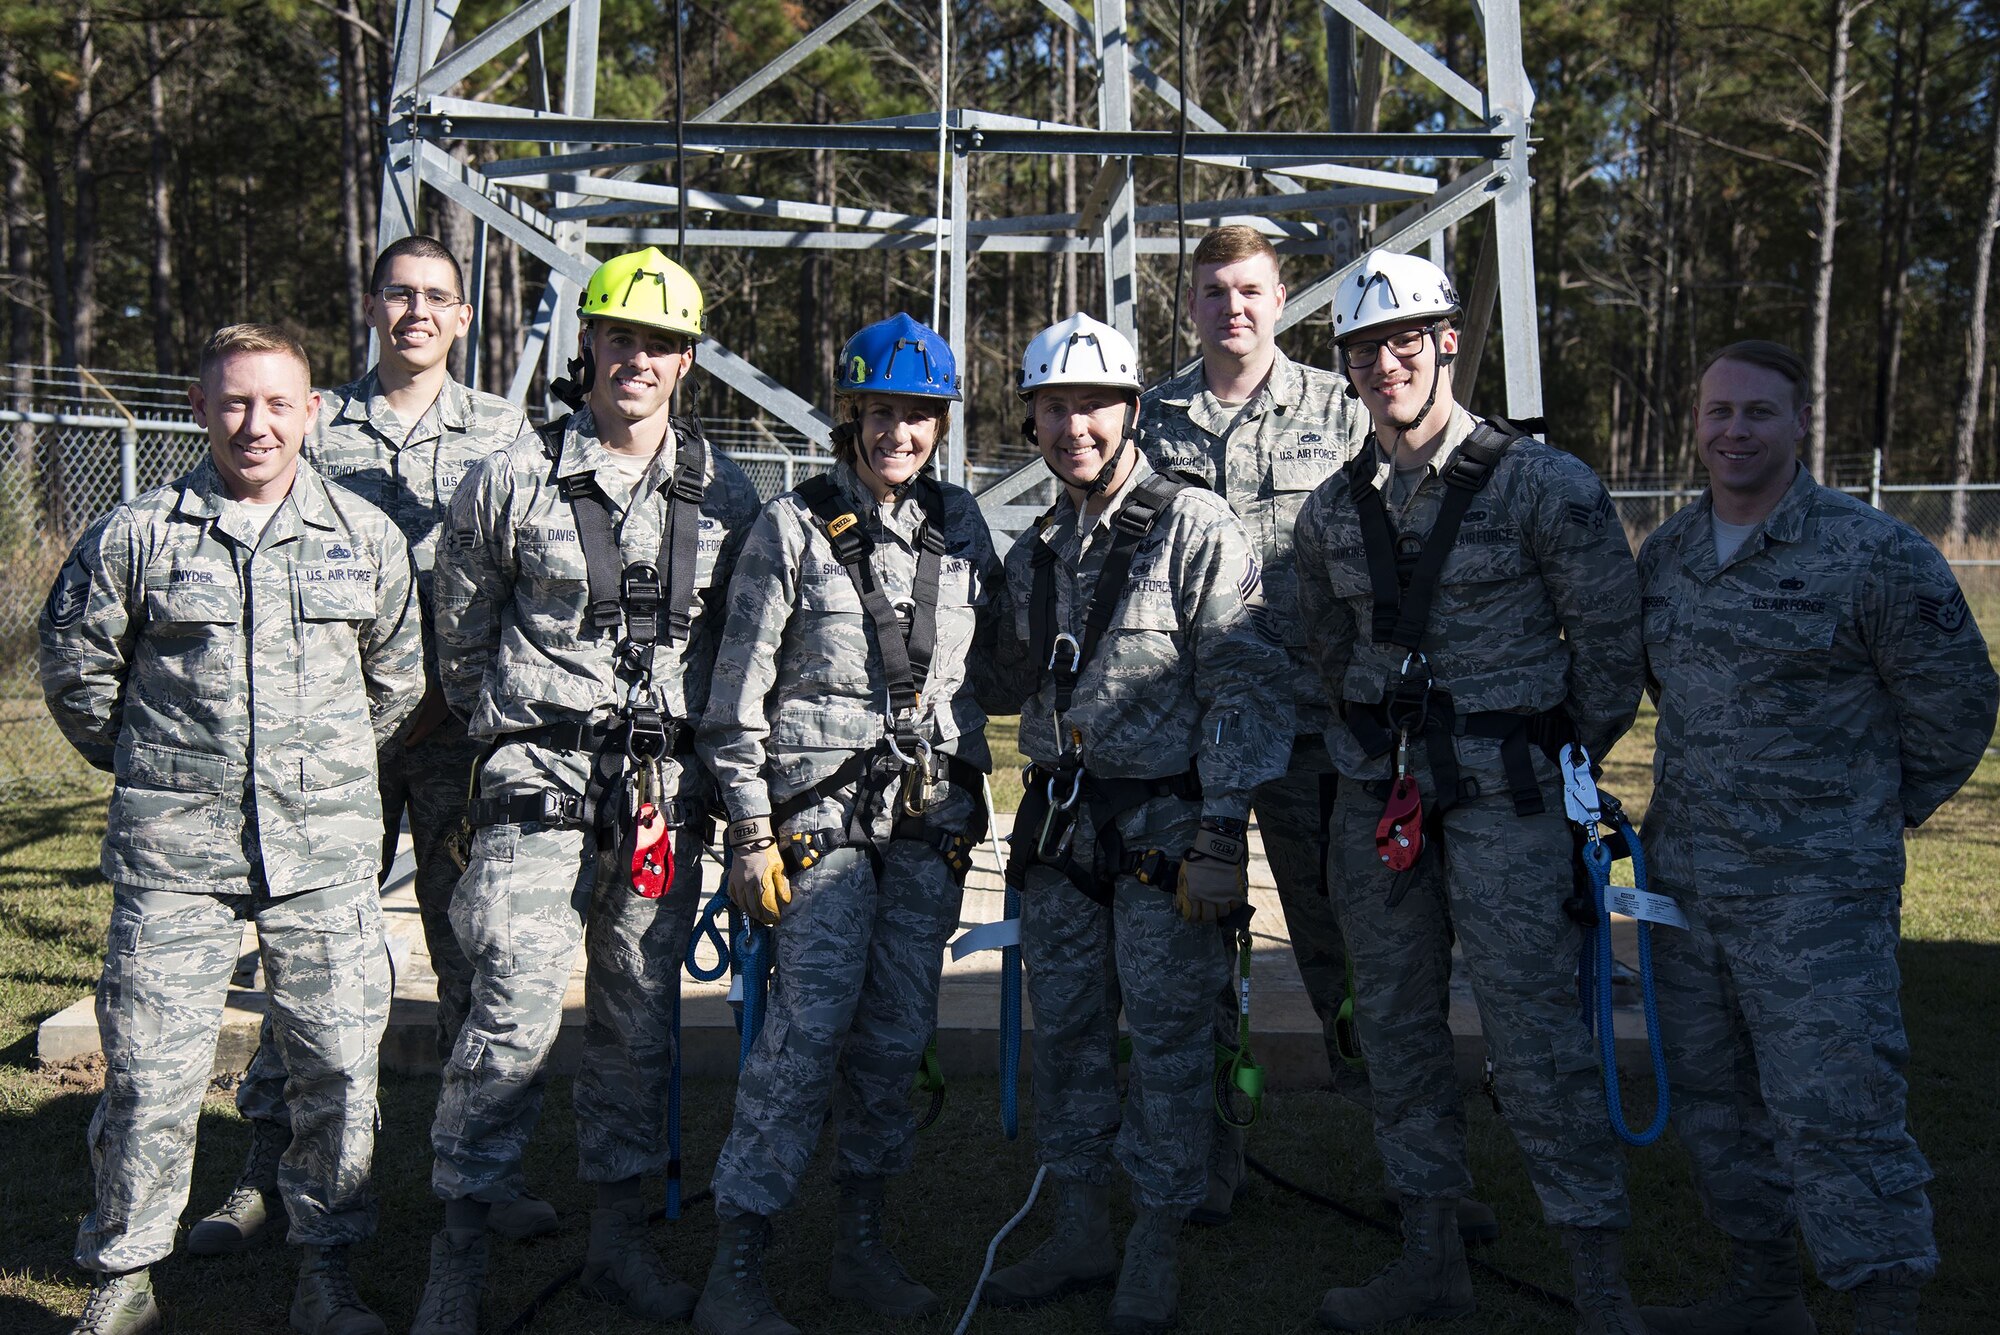 Team Moody Airmen and 23d Wing leadership pose for a photo, Dec. 11, 2017, at Moody Air Force Base, Ga. Moody leadership visited the radar, airfield and weather systems facility to familiarize themselves with the 23d Operations Support Squadron’s duties and to gain a better understanding of how they impact the mission. (U.S. Air Force photo by Airman 1st Class Erick Requadt)